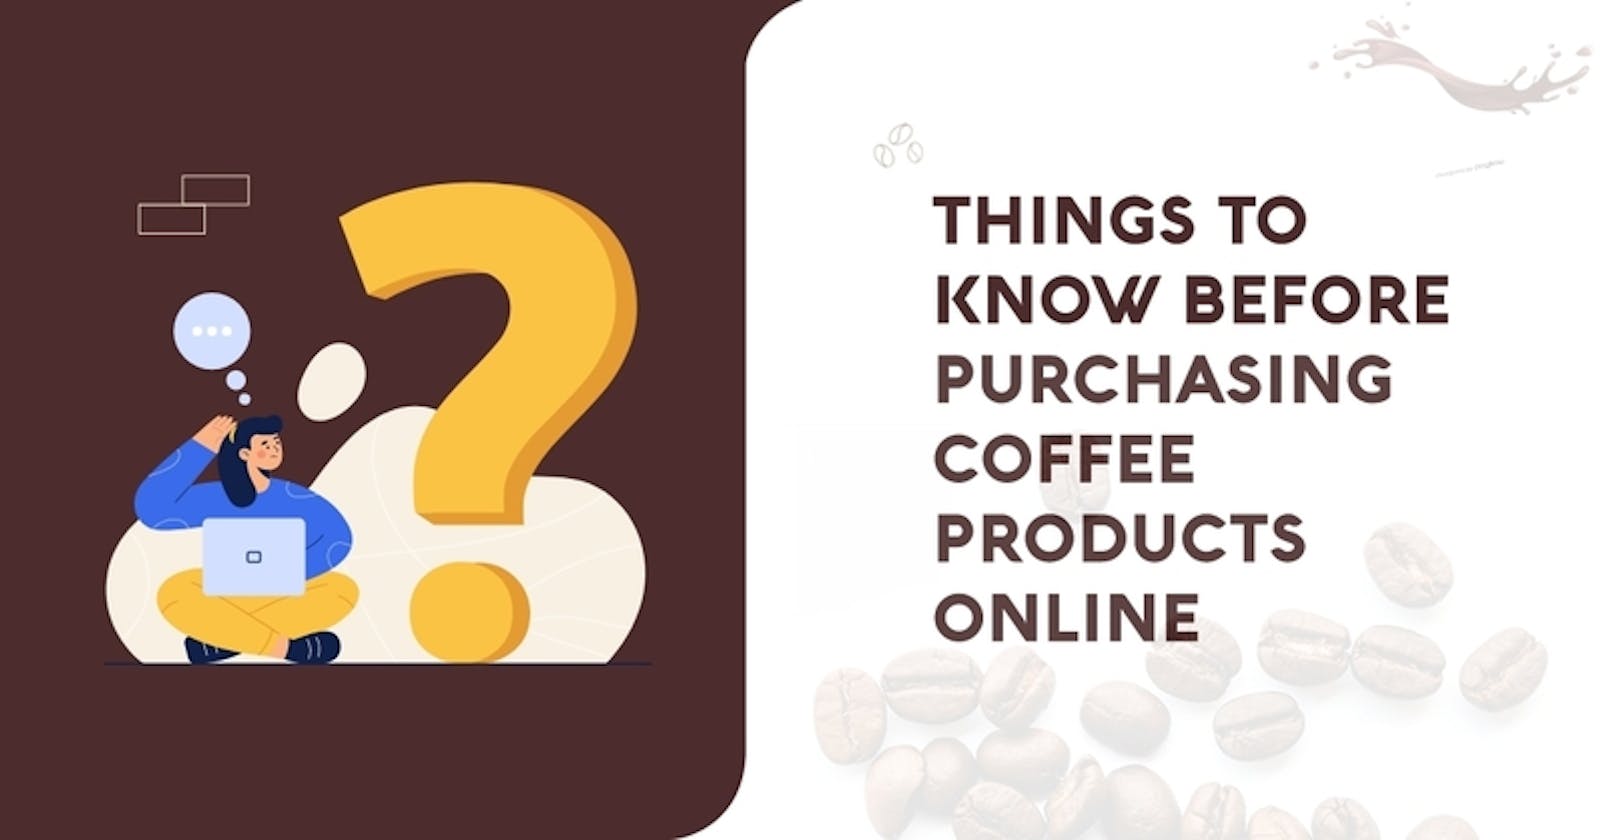 Things to Know Before Purchasing Coffee Products Online